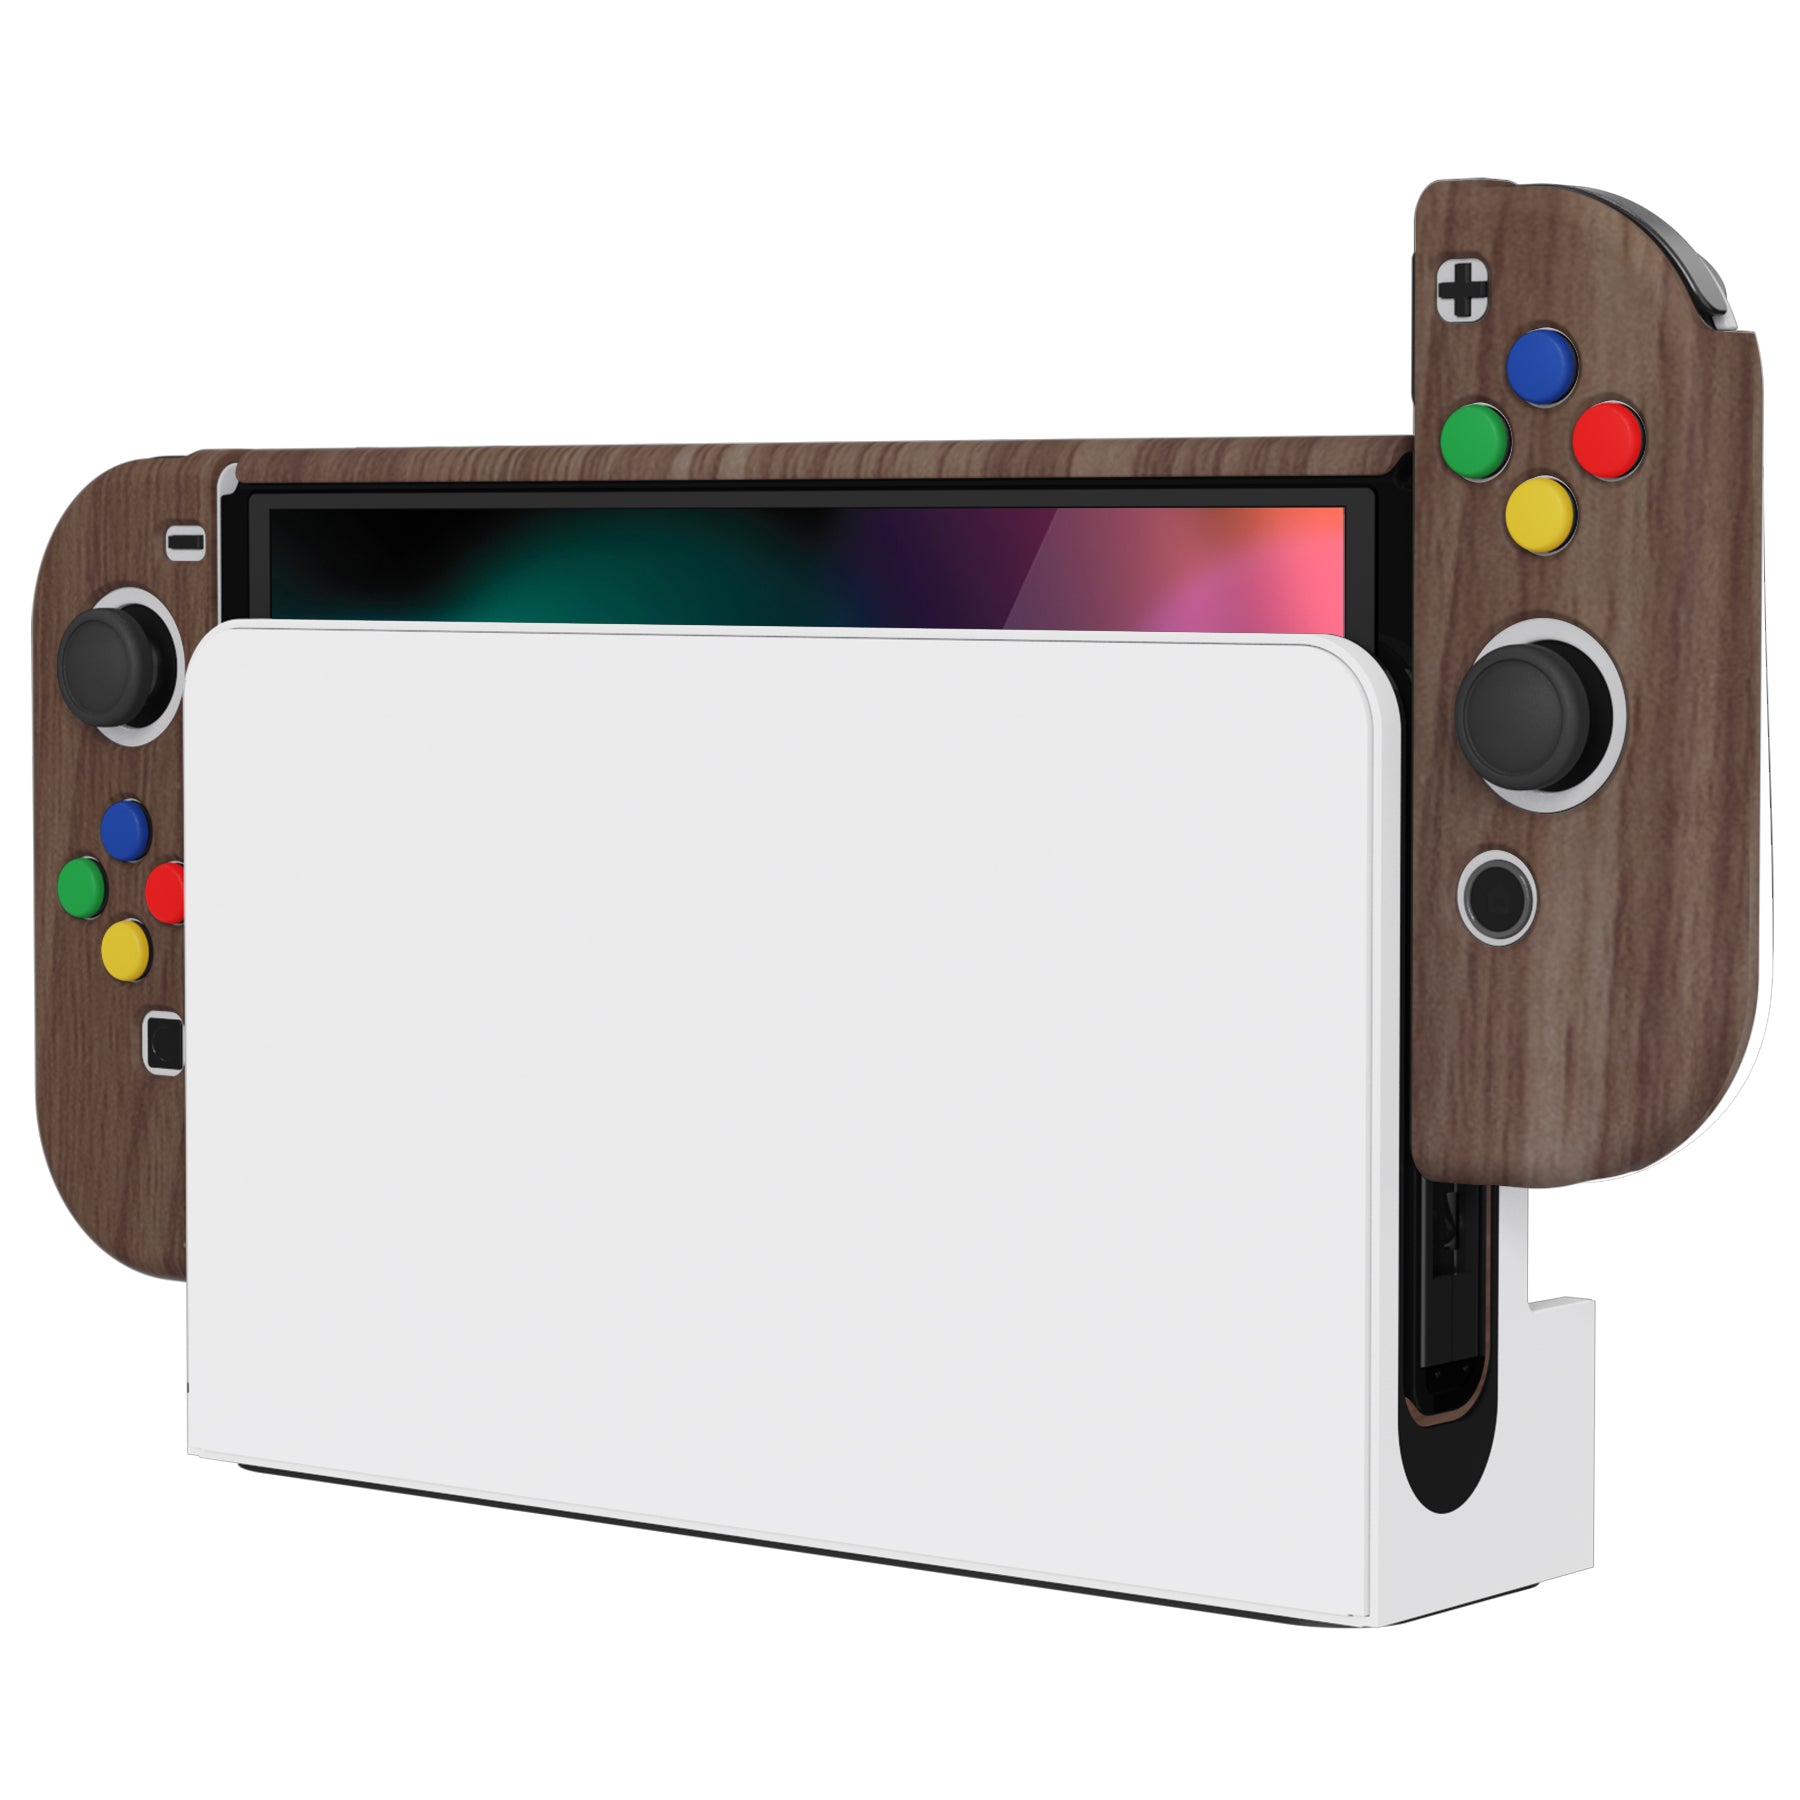 Handmade Wooden Housings for Nintendo Switch Joy-Cons by Aldered Design  [] — Tools and Toys